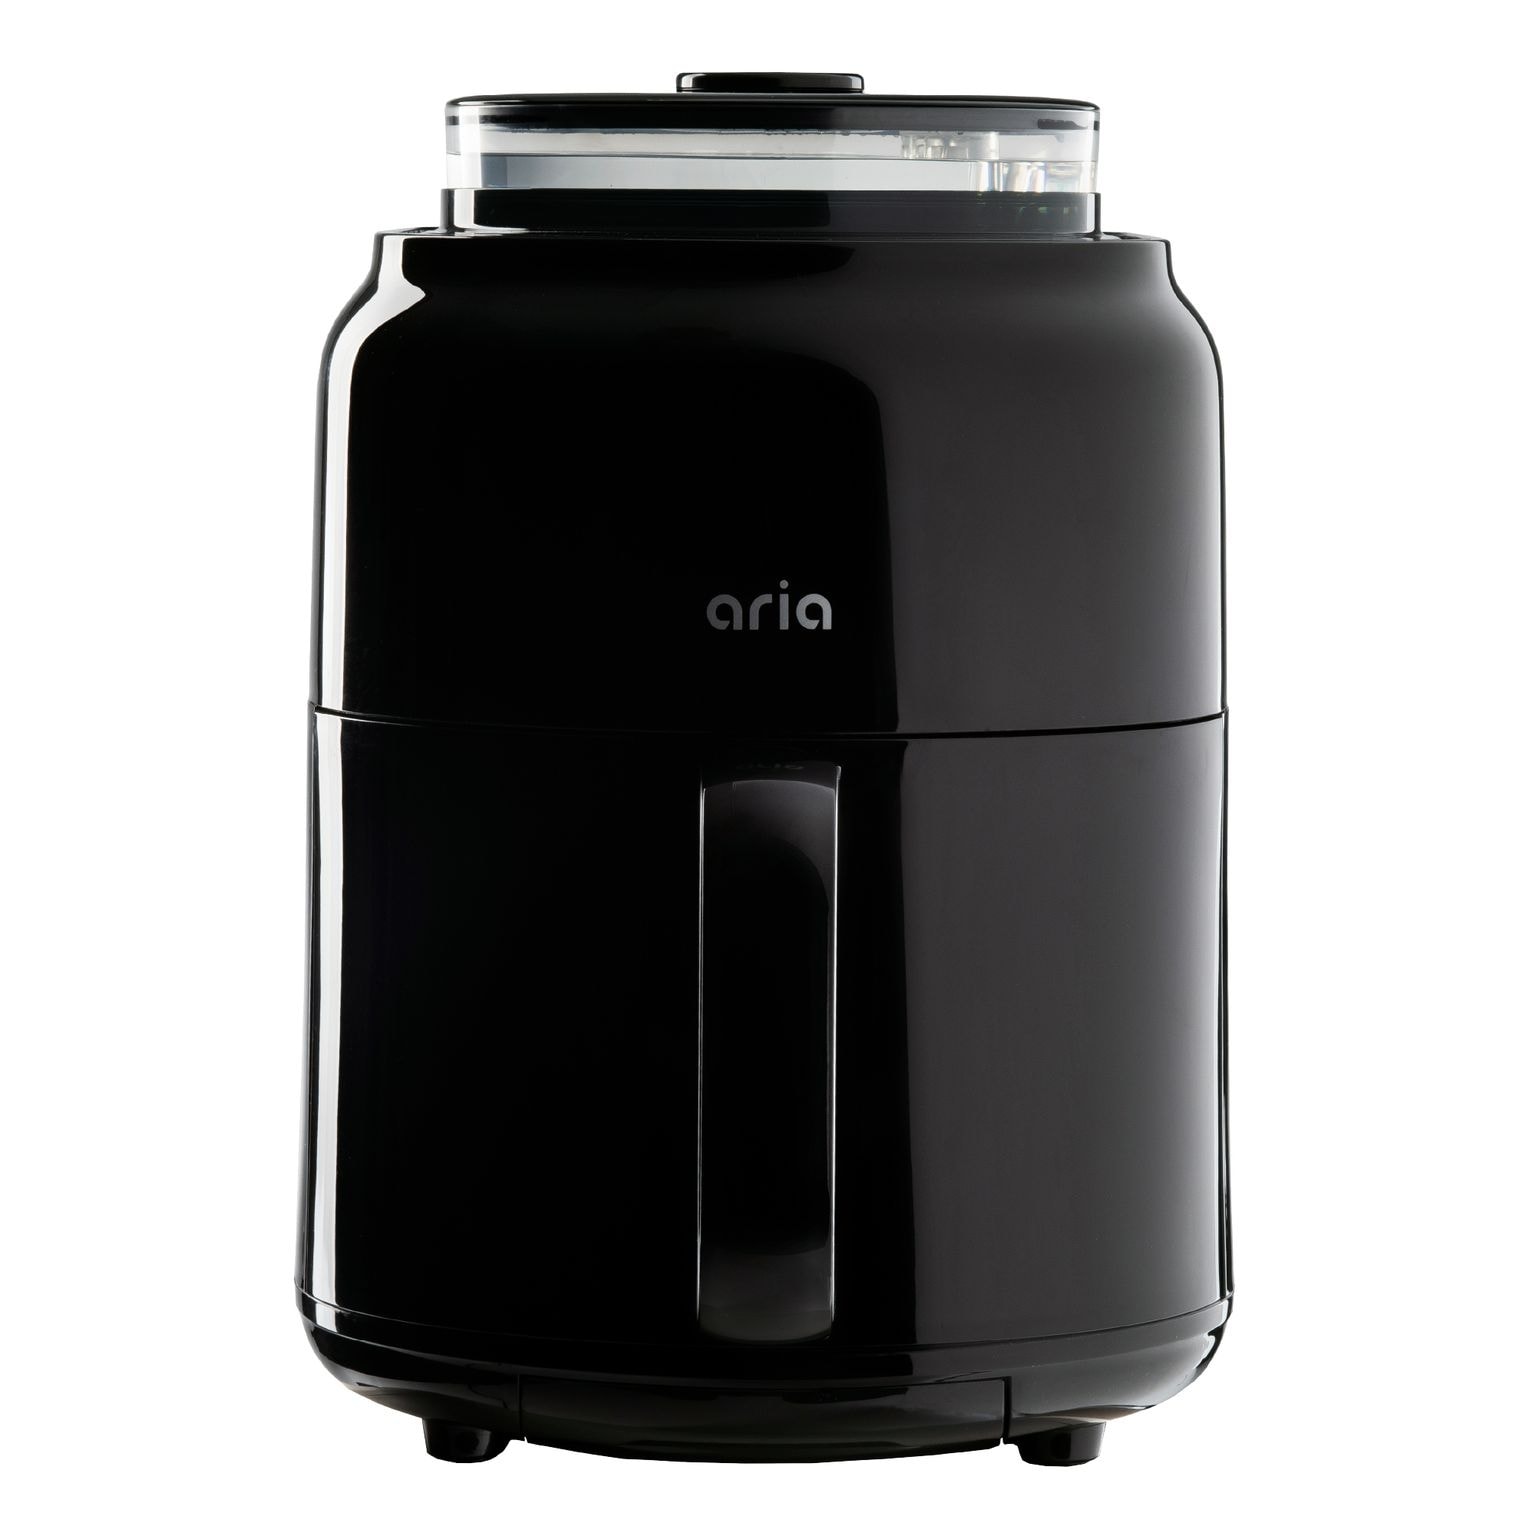 https://ak1.ostkcdn.com/images/products/is/images/direct/8a3cf4429116b8d49ada2570b038efa000f481a2/Aria-5Qt-Steam-Air-Fryer-with-Hybrid-Crisp-%26-Steam-Cooking-and-Detachable-Reservoir.jpg